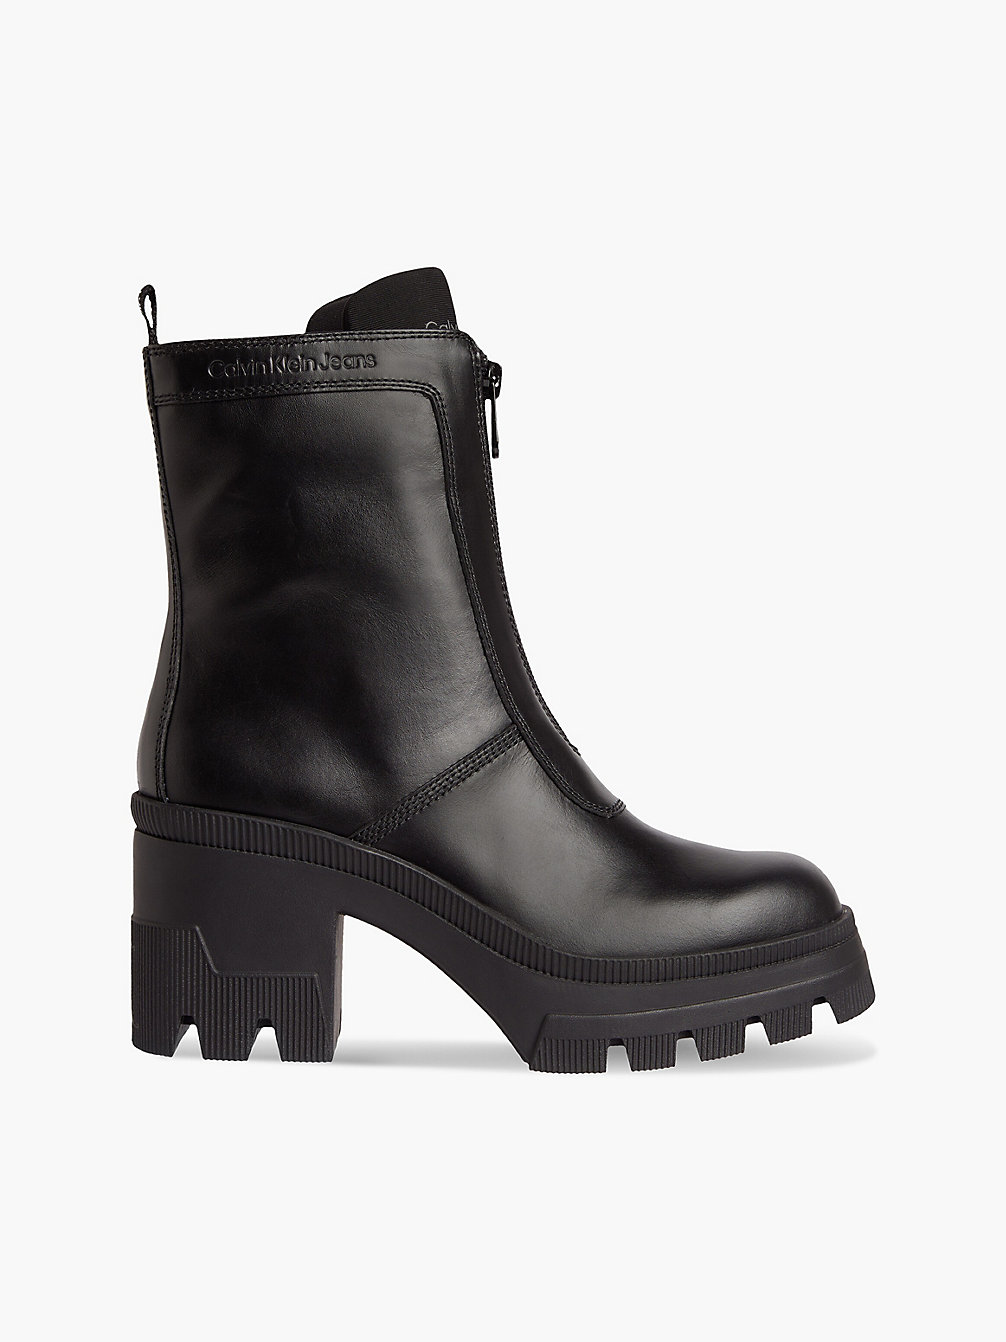 BLACK Leather Chunky Heeled Boots undefined women Calvin Klein